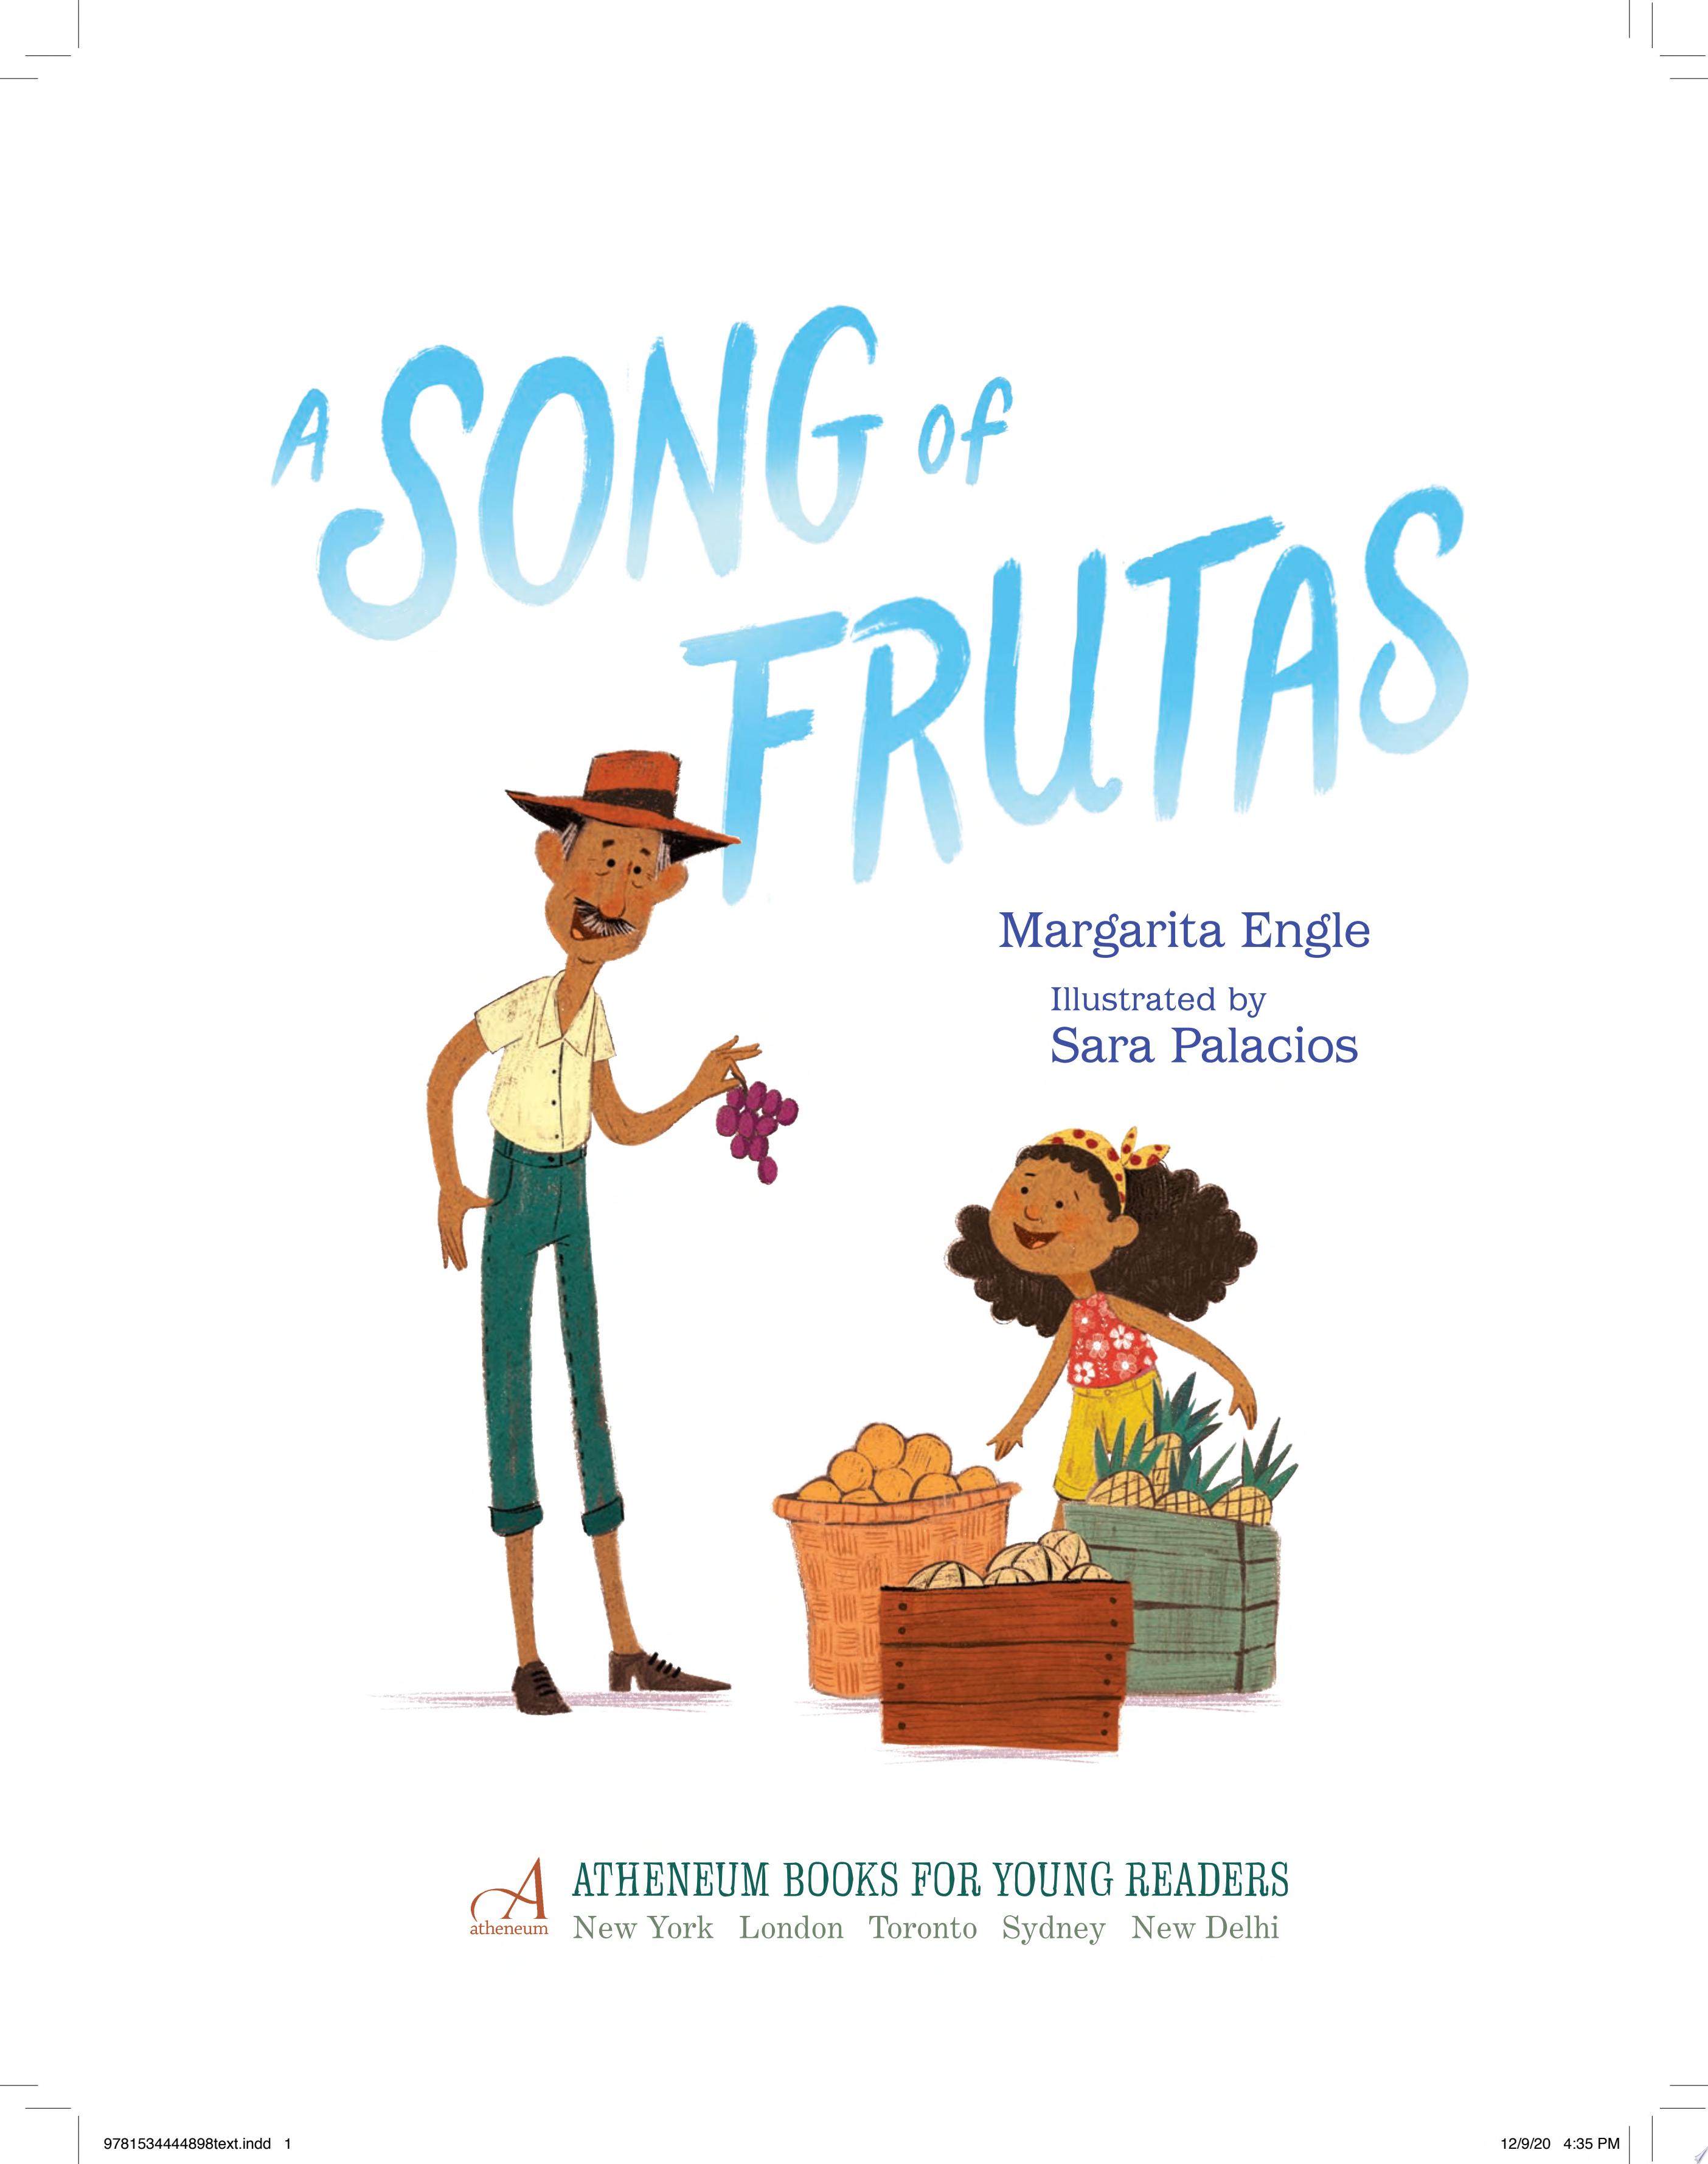 Image for "A Song of Frutas"